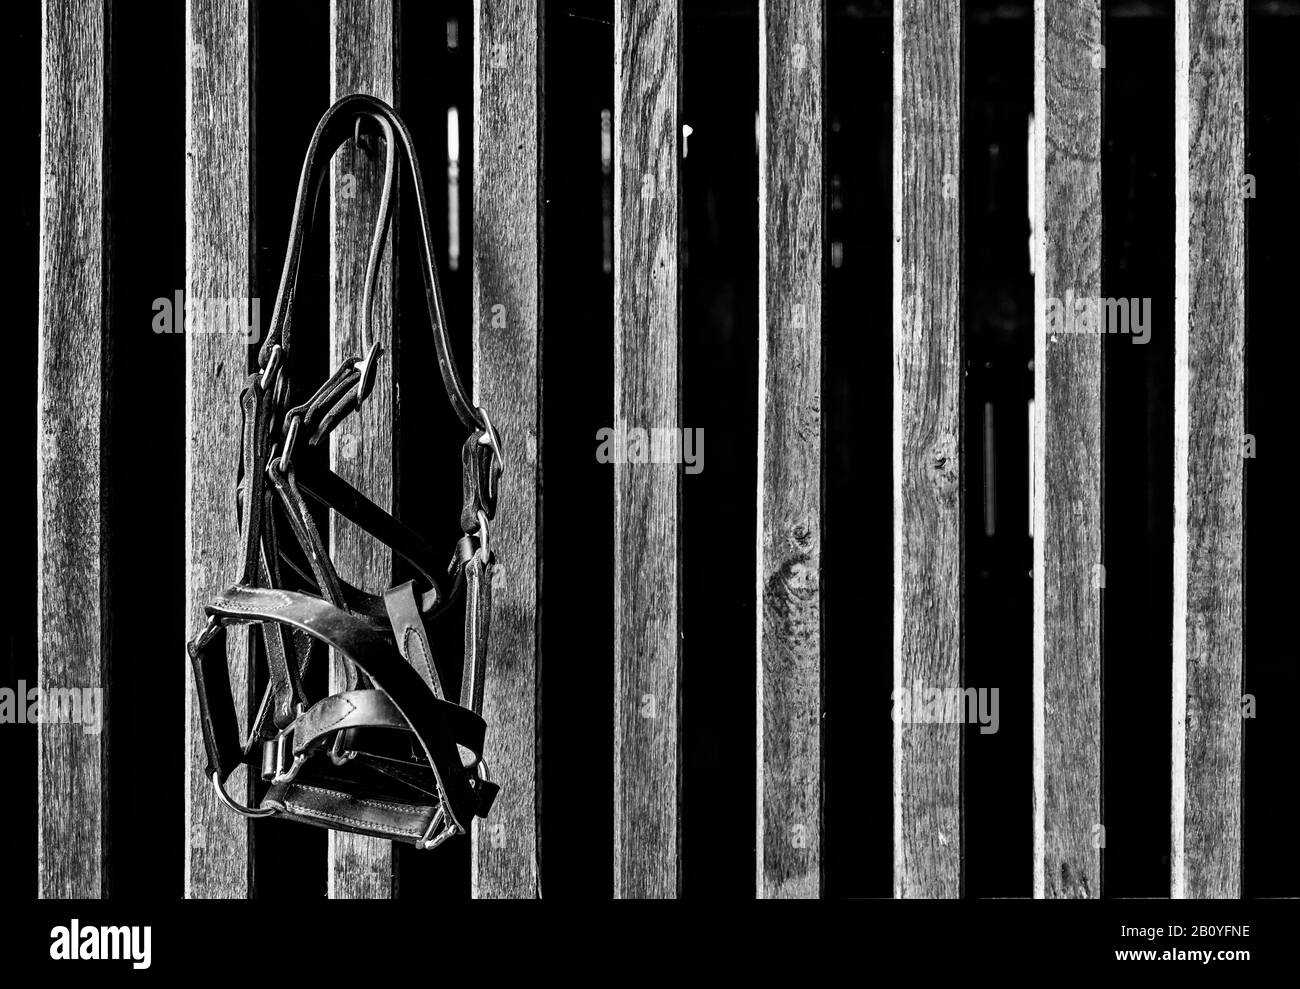 Bridle in Black and White hanging on wooden slats Stock Photo